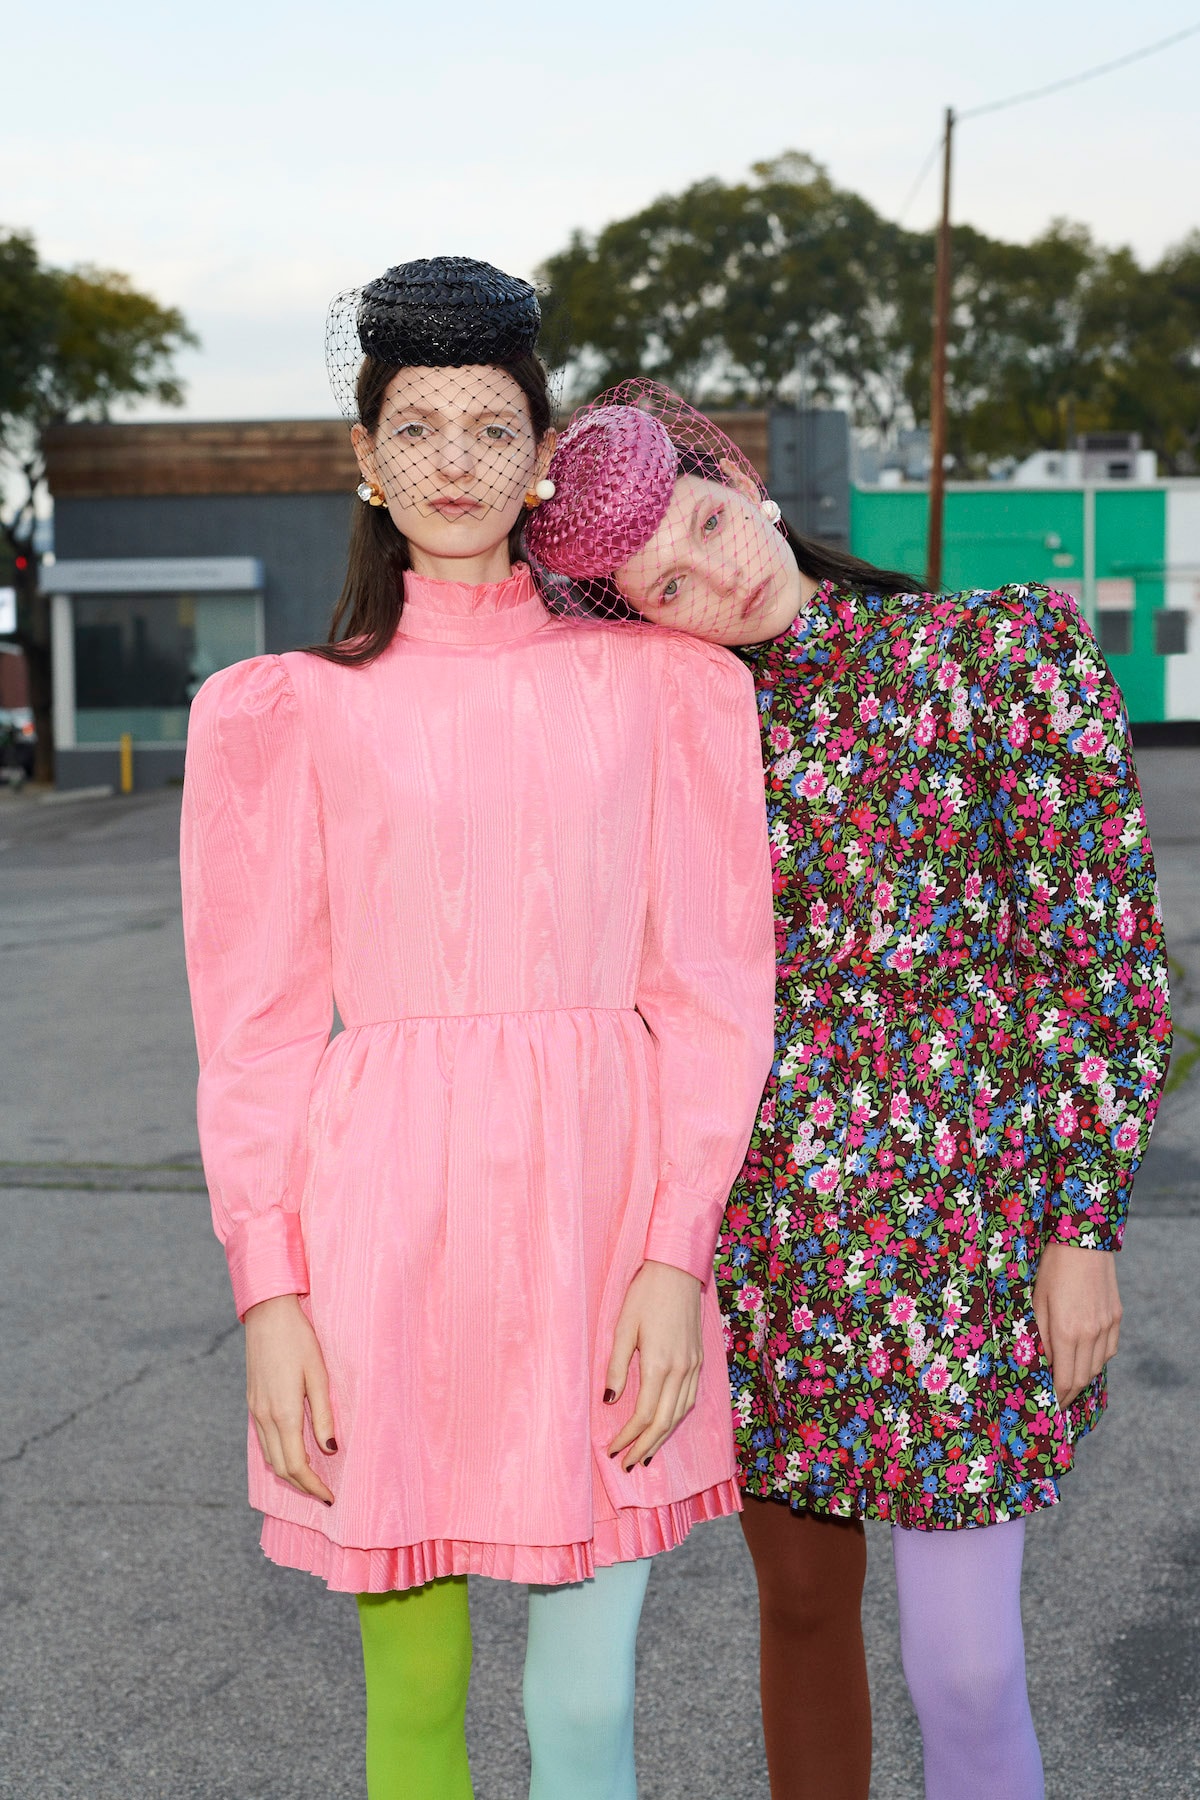 The Marc Jacobs Campaign Lookbook Release New Label Marc Jacobs Brand RTW Ready To Wear Range Accessories Apparel 